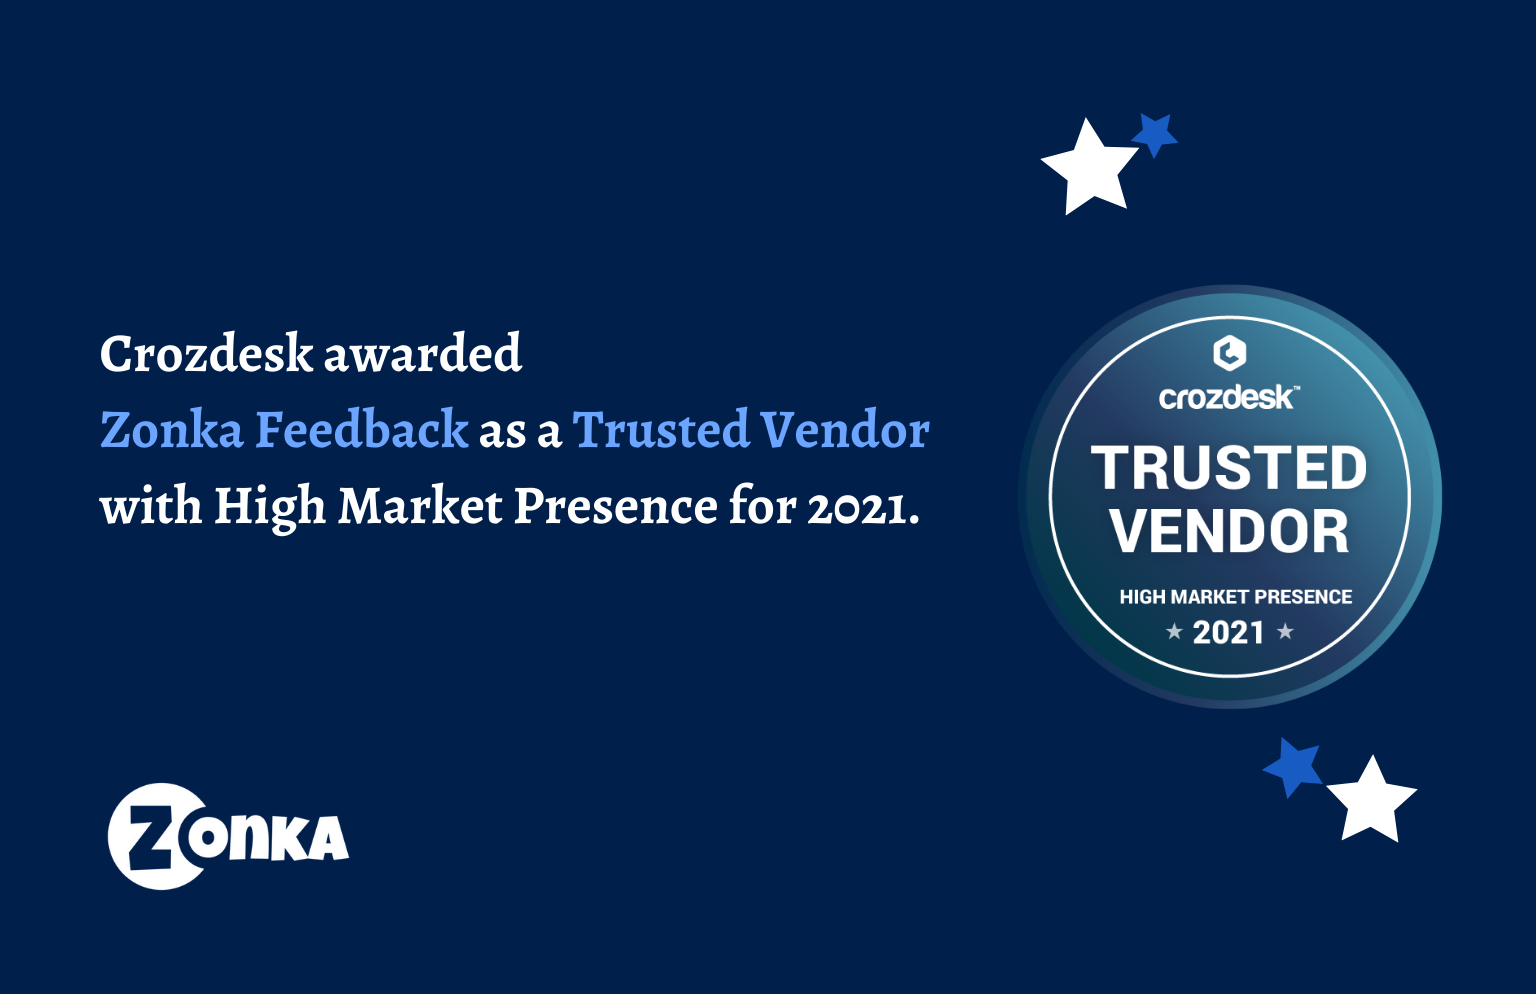 Zonka Feedback is Recognized as Trusted Vendor 2021 By Crozdesk